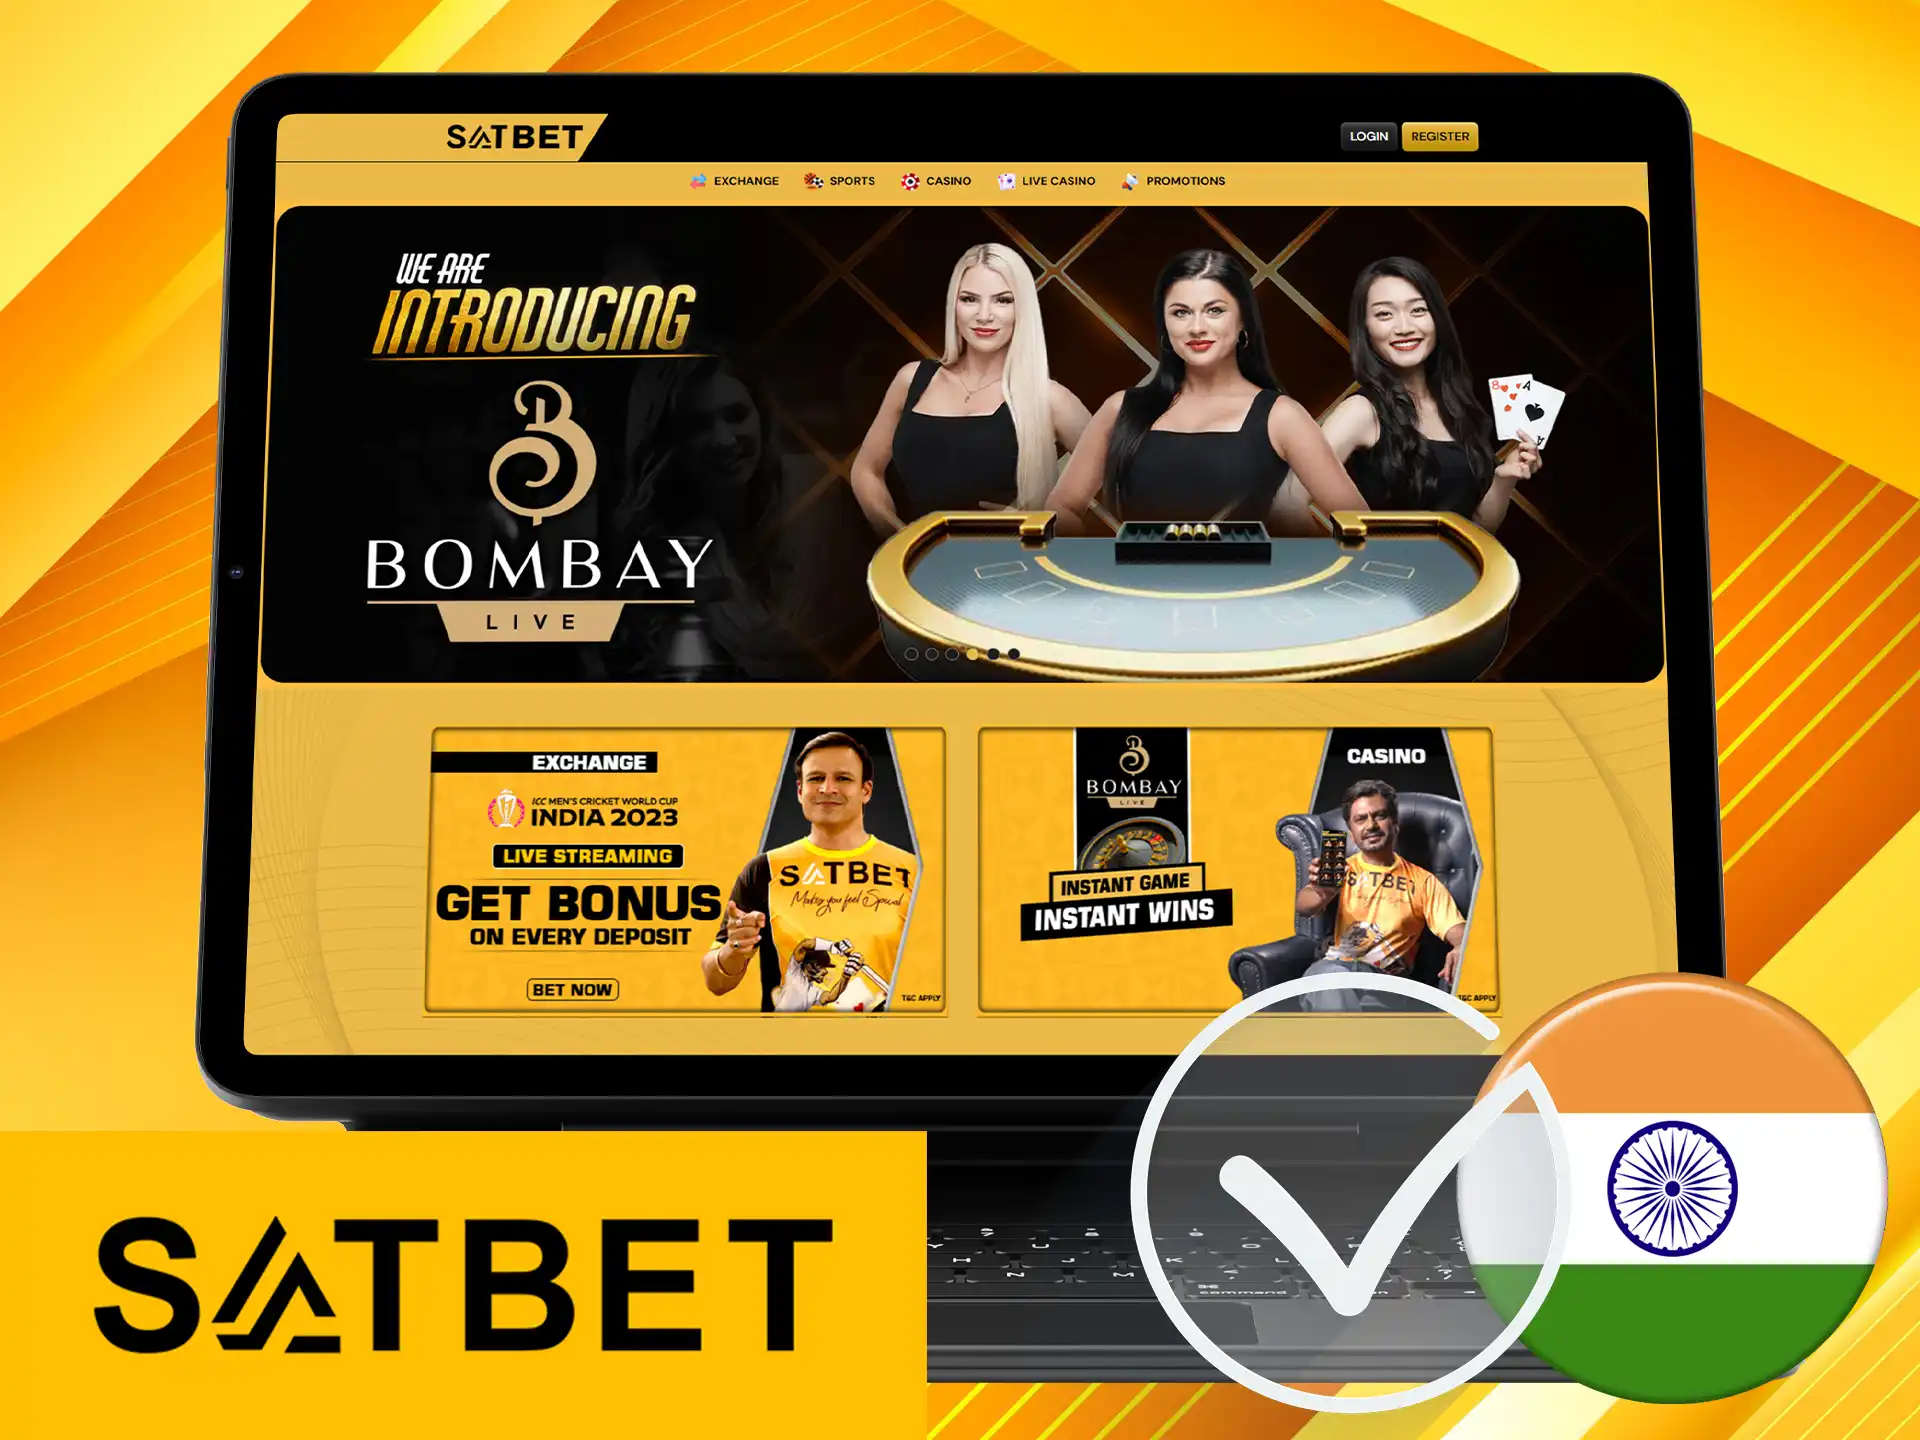 Satbet is legal in India, sports betting and casino betting are not banned.